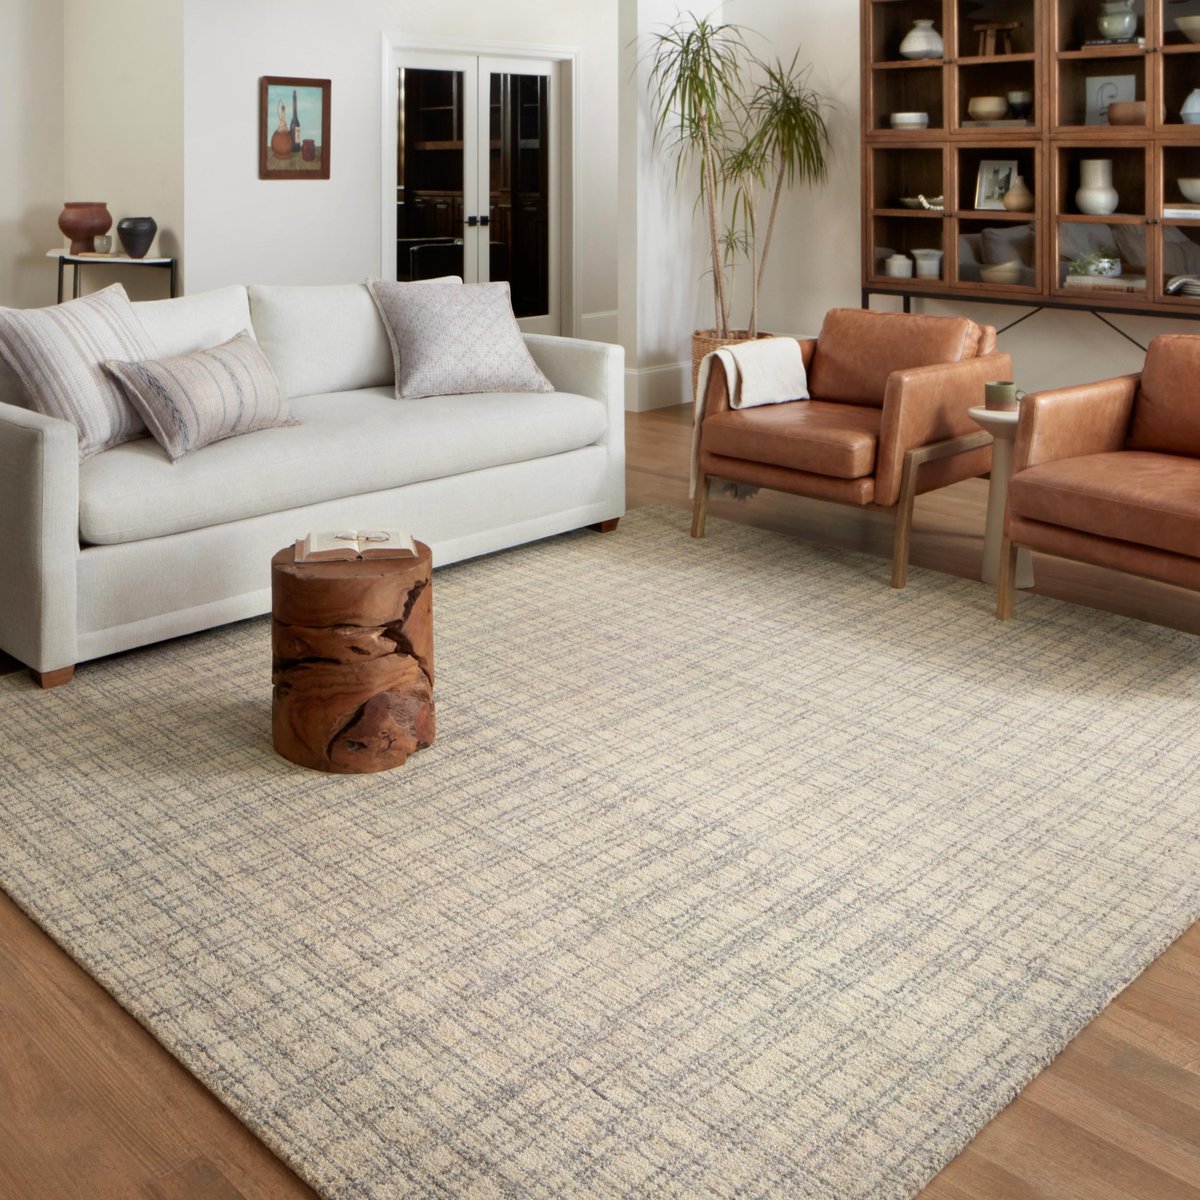 Polly  - Best Living Room Rugs